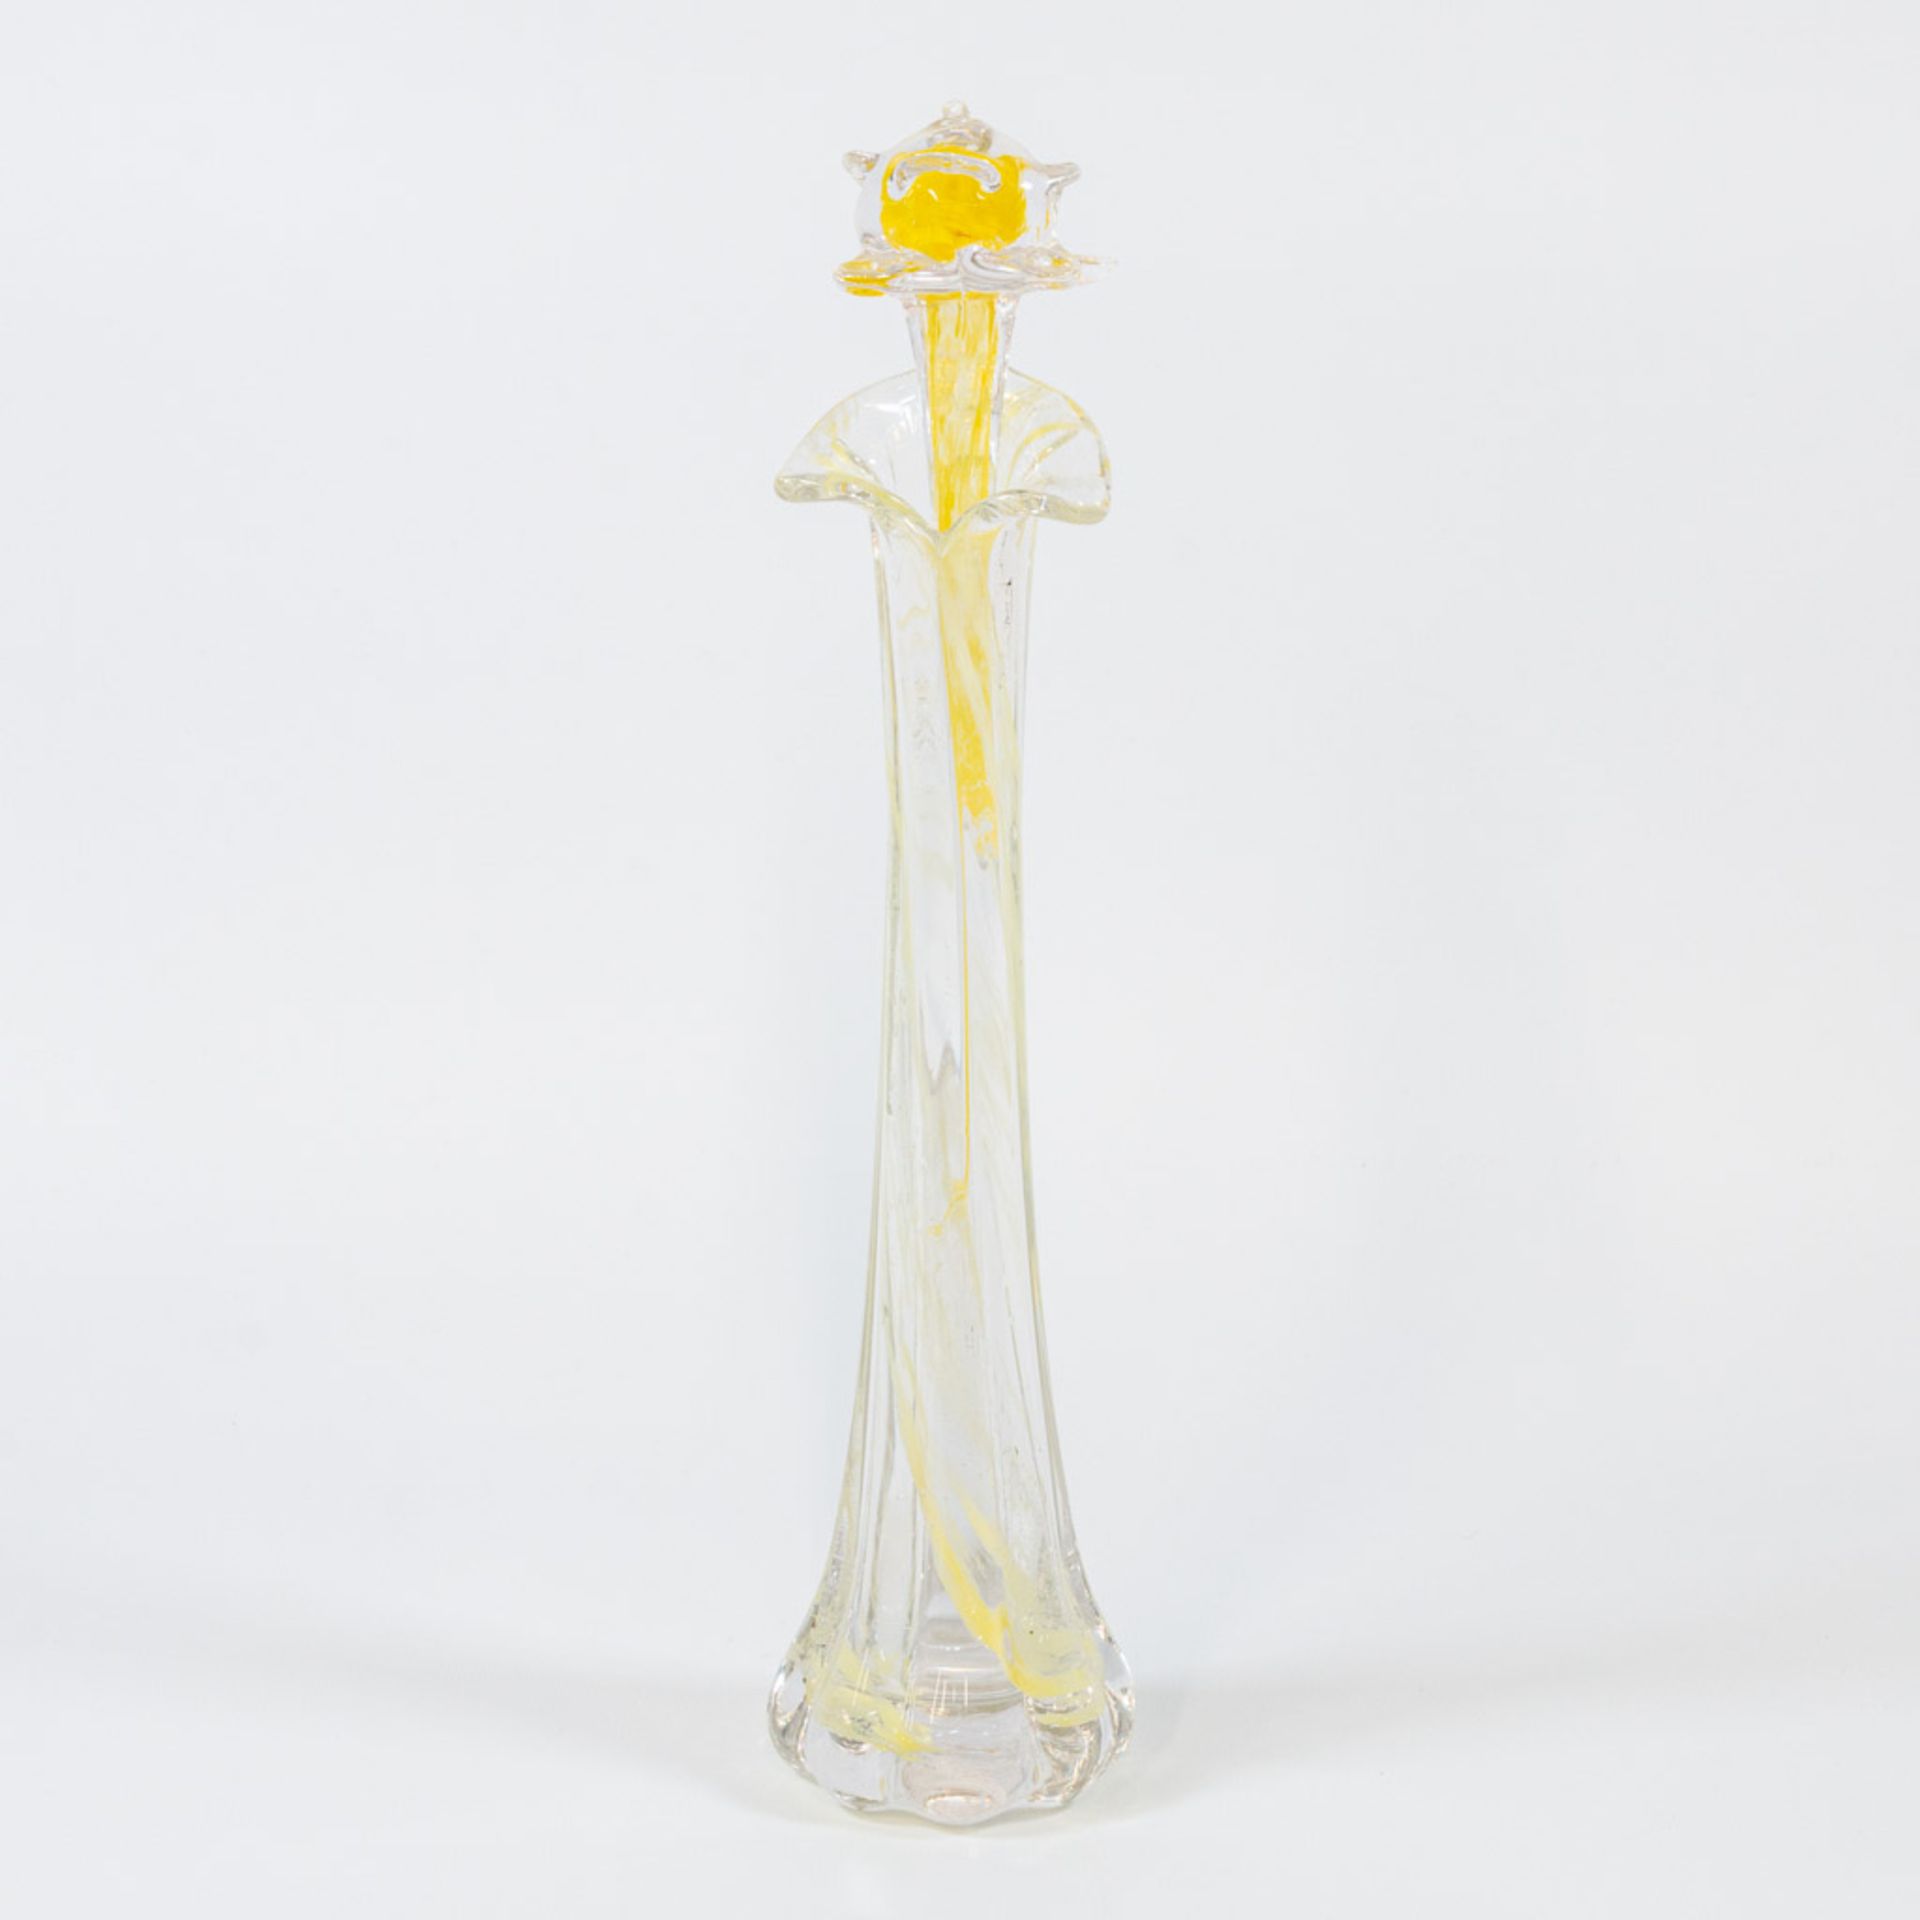 A collection of 4 vases and 4 glass flowers made in Murano, Italy. - Image 19 of 49